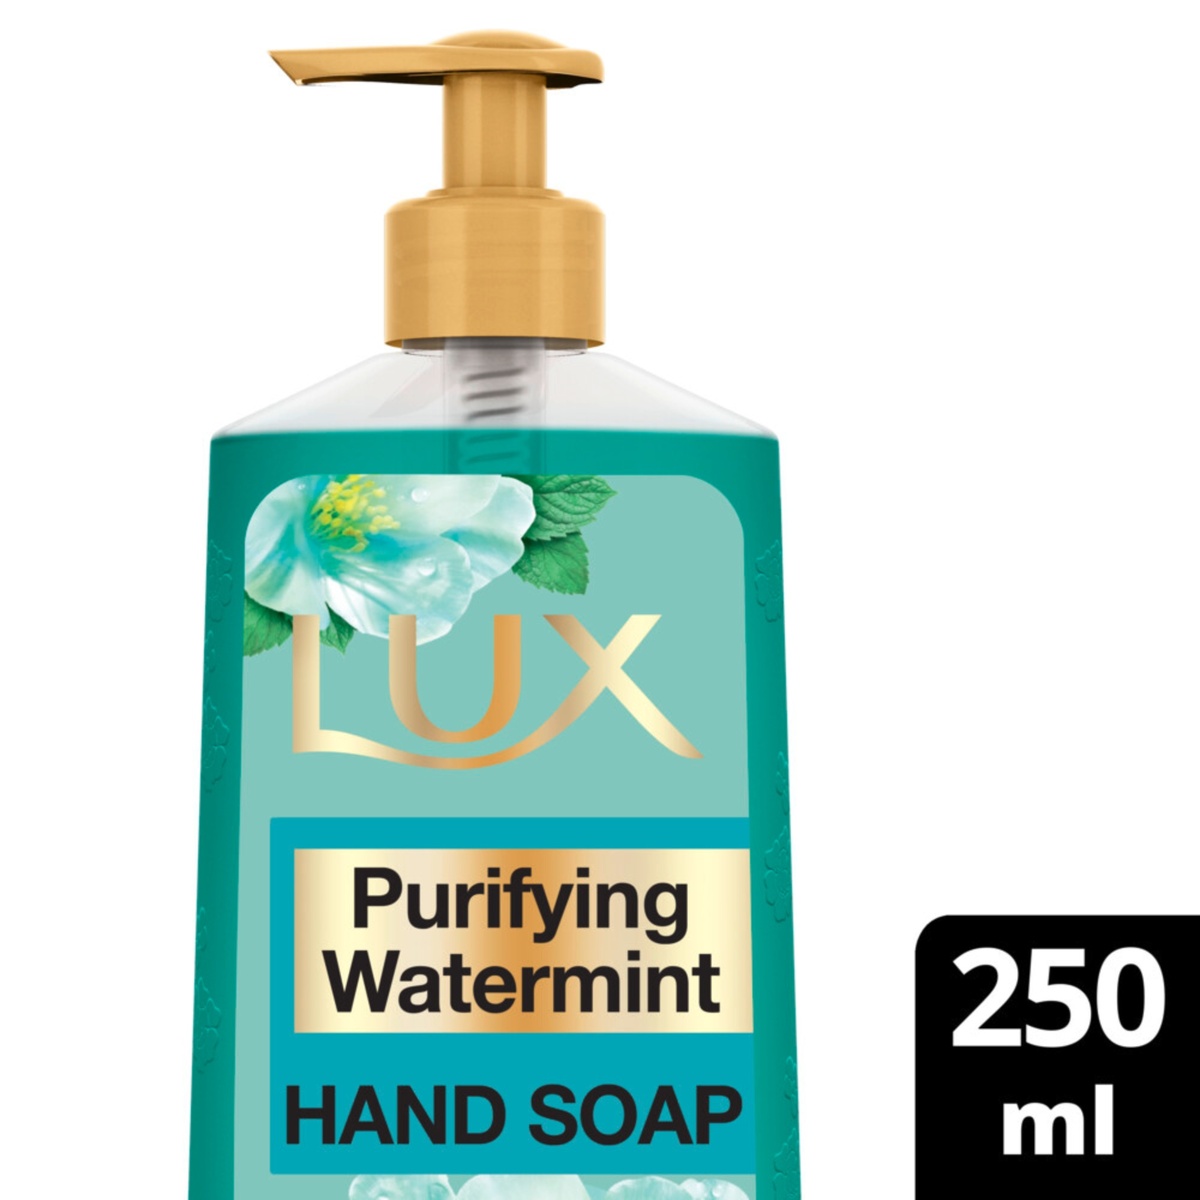 Lux Purifying Watermint Perfumed Hand Soap 250 ml